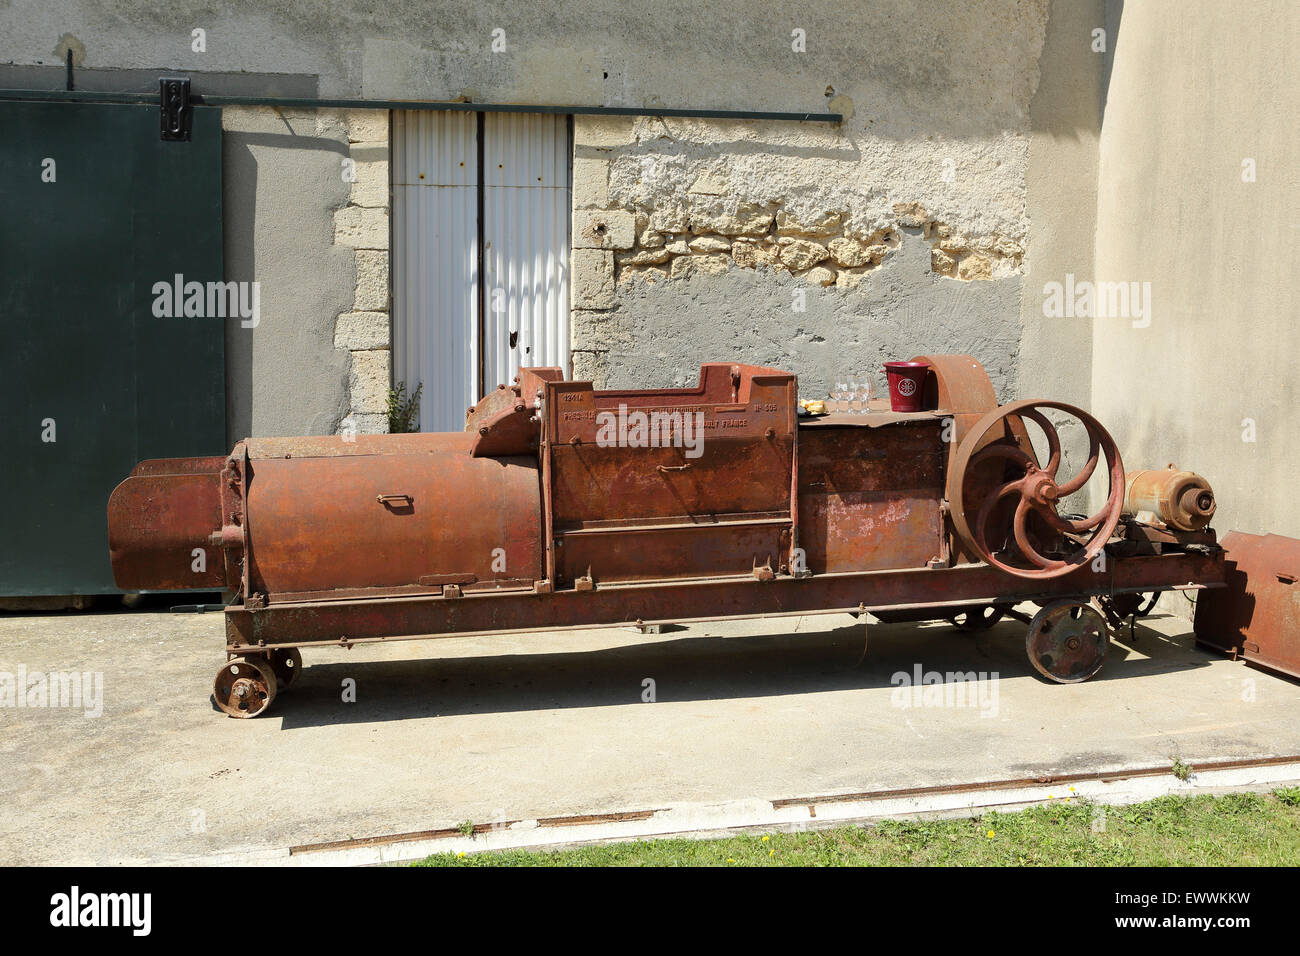 An old de-stalking machine at the Domaine de Massereau winery in Sommieres, France. The estate is in Languedoc-Roussillon. Stock Photo